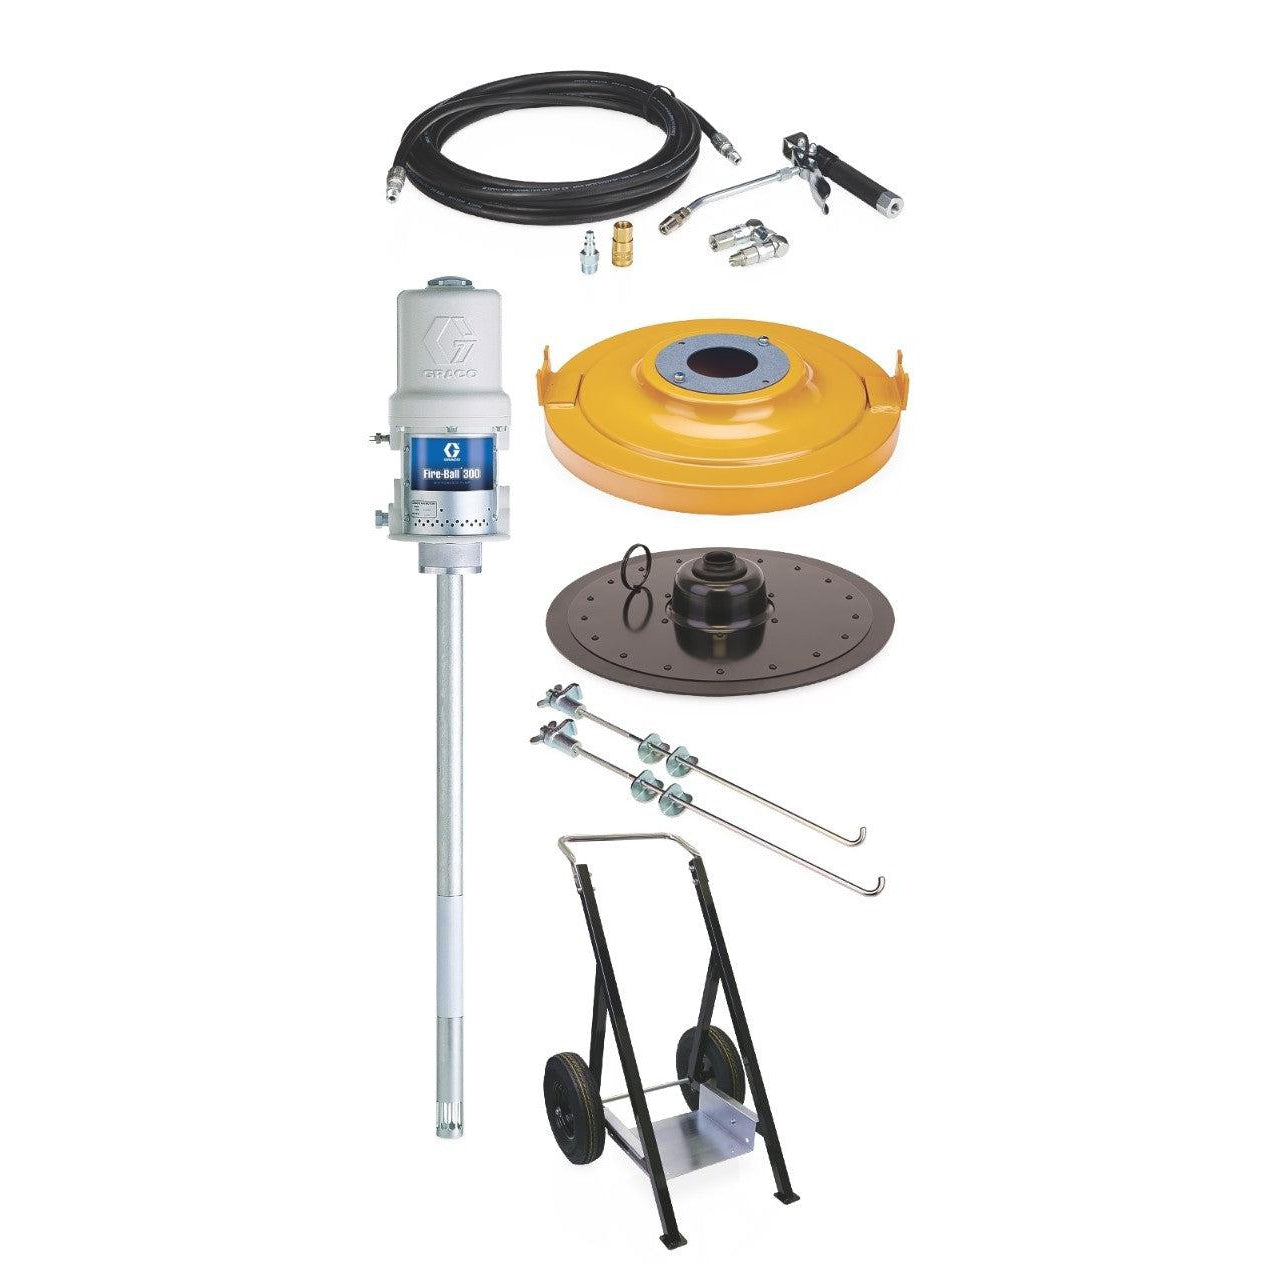 Fire-Ball® 300 Series 50:1 120 lb (55 kg). Grease Pump - Portable Package with Heavy Duty Cart